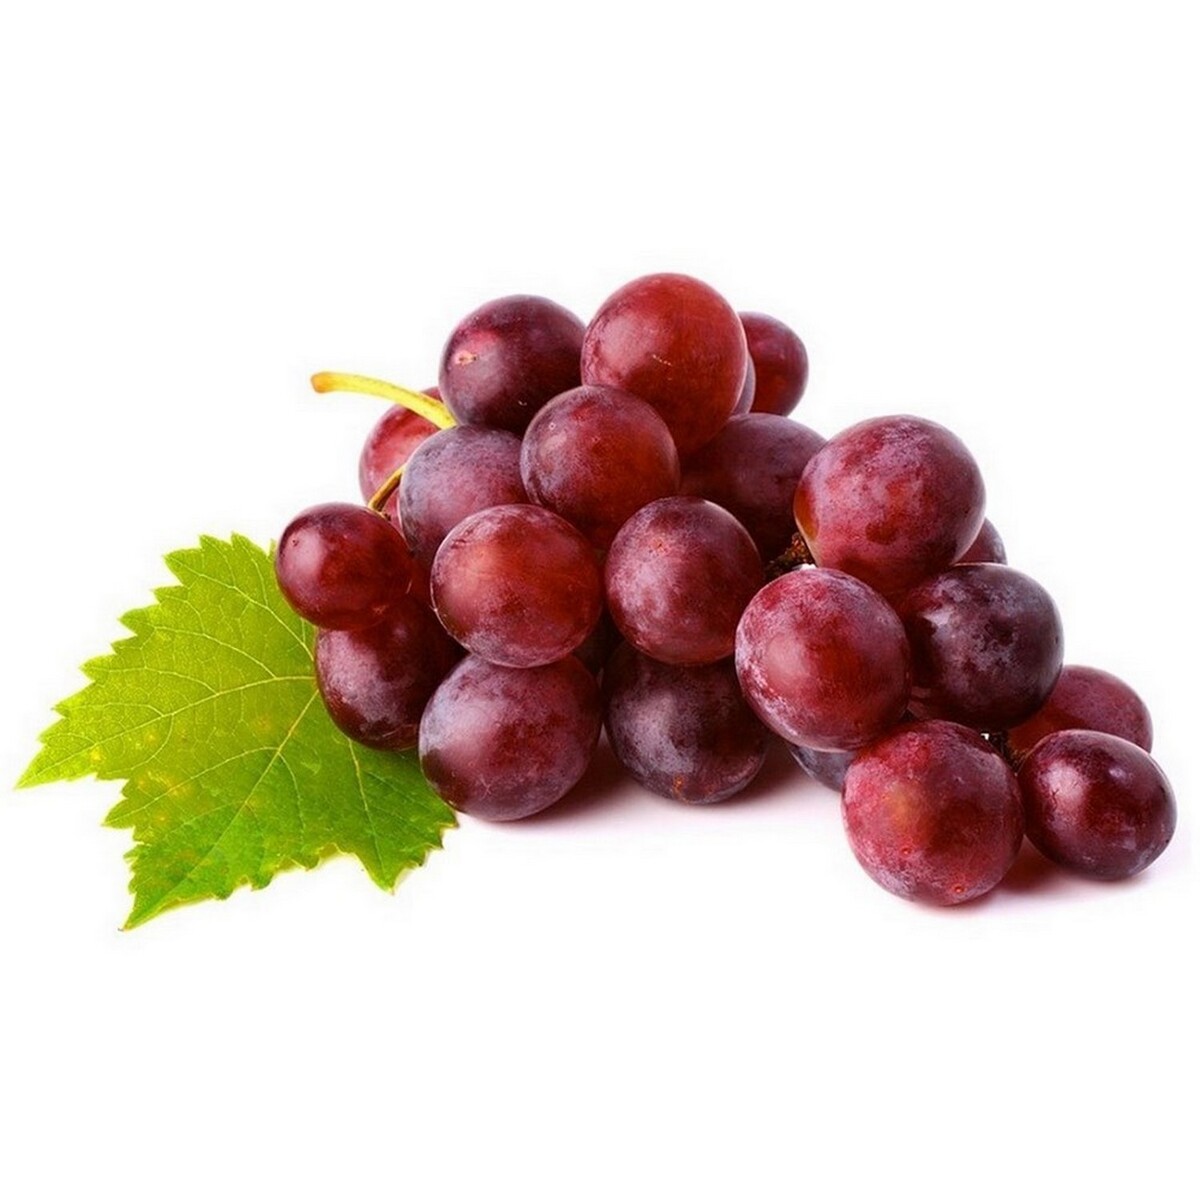 Grapes Red Globe Chile 500g